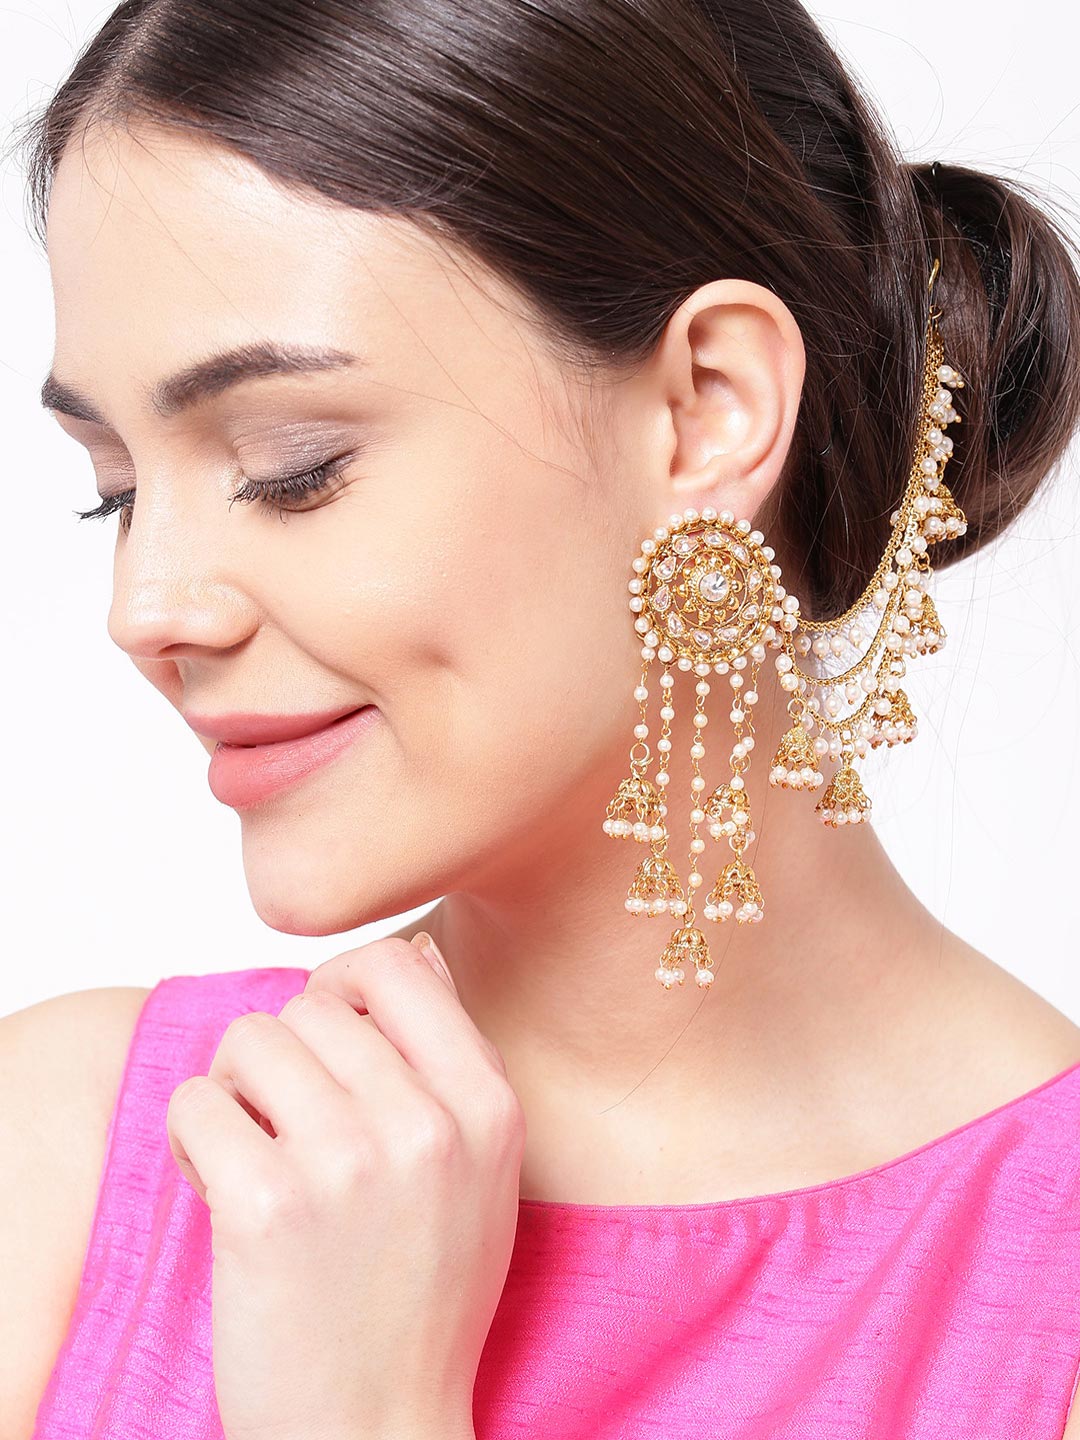 Modern Stylish Gold Dangle Earring Attachment Earrings With Irregular Pearl  Strand For Women And Girls Featuring Godern, Starfish, And Cute Design From  Yzhenzhen, $11.81 | DHgate.Com